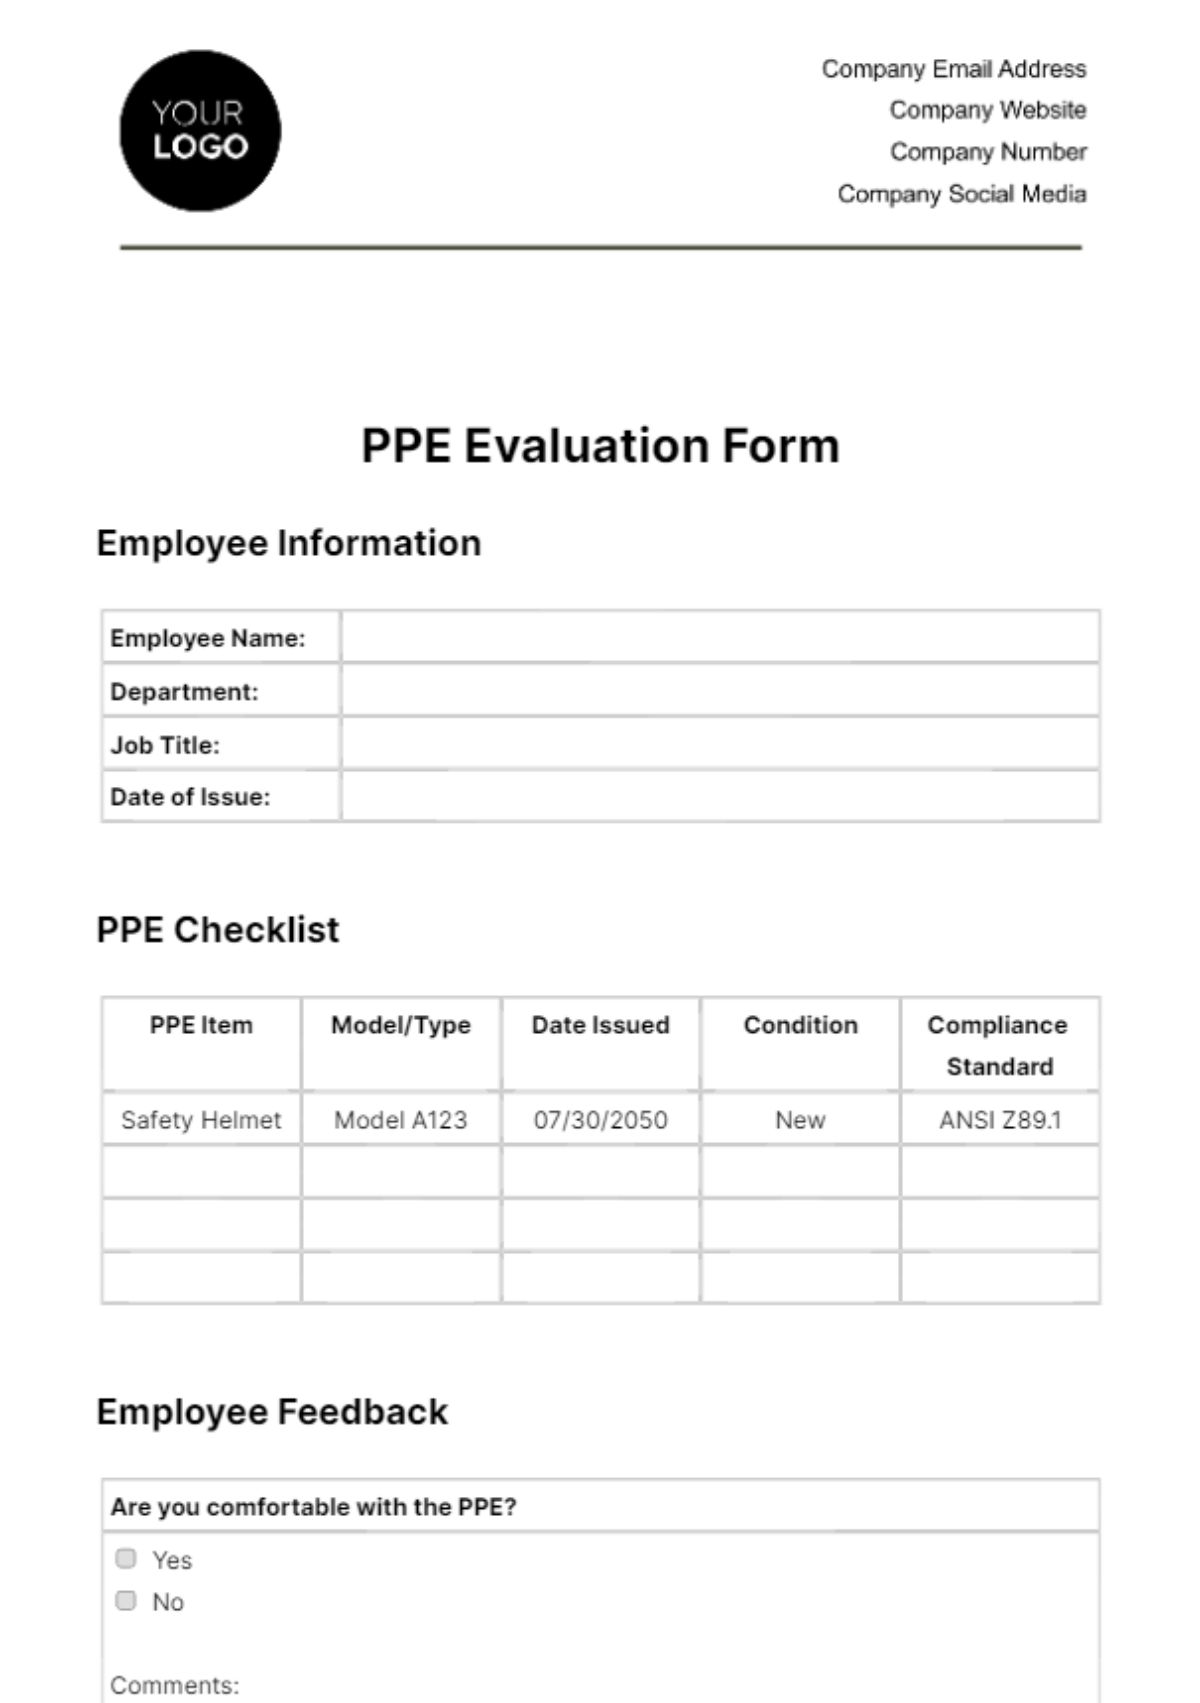 Free PPE Evaluation Form Template